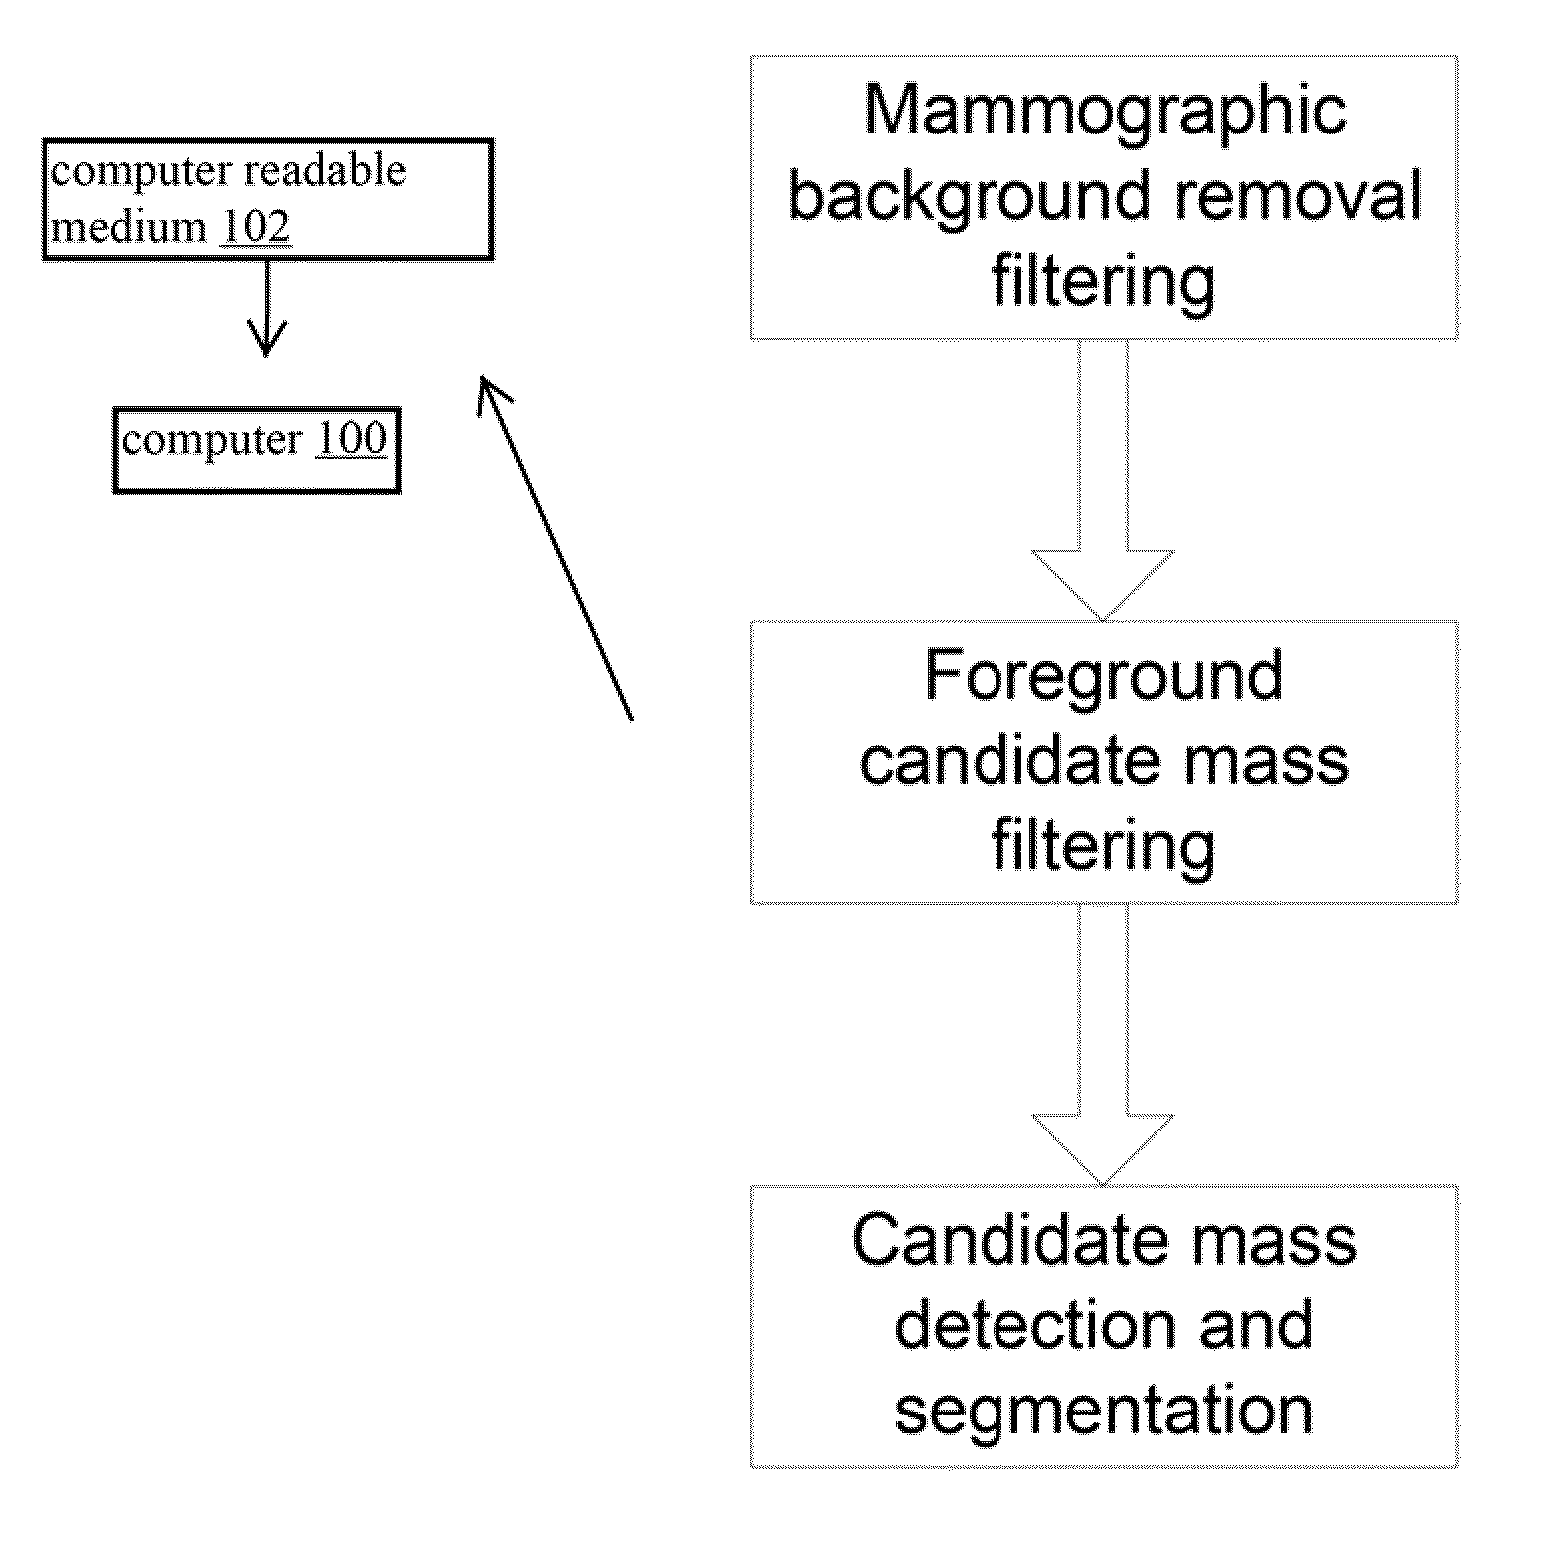 Method for mass candidate detection and segmentation in digital mammograms